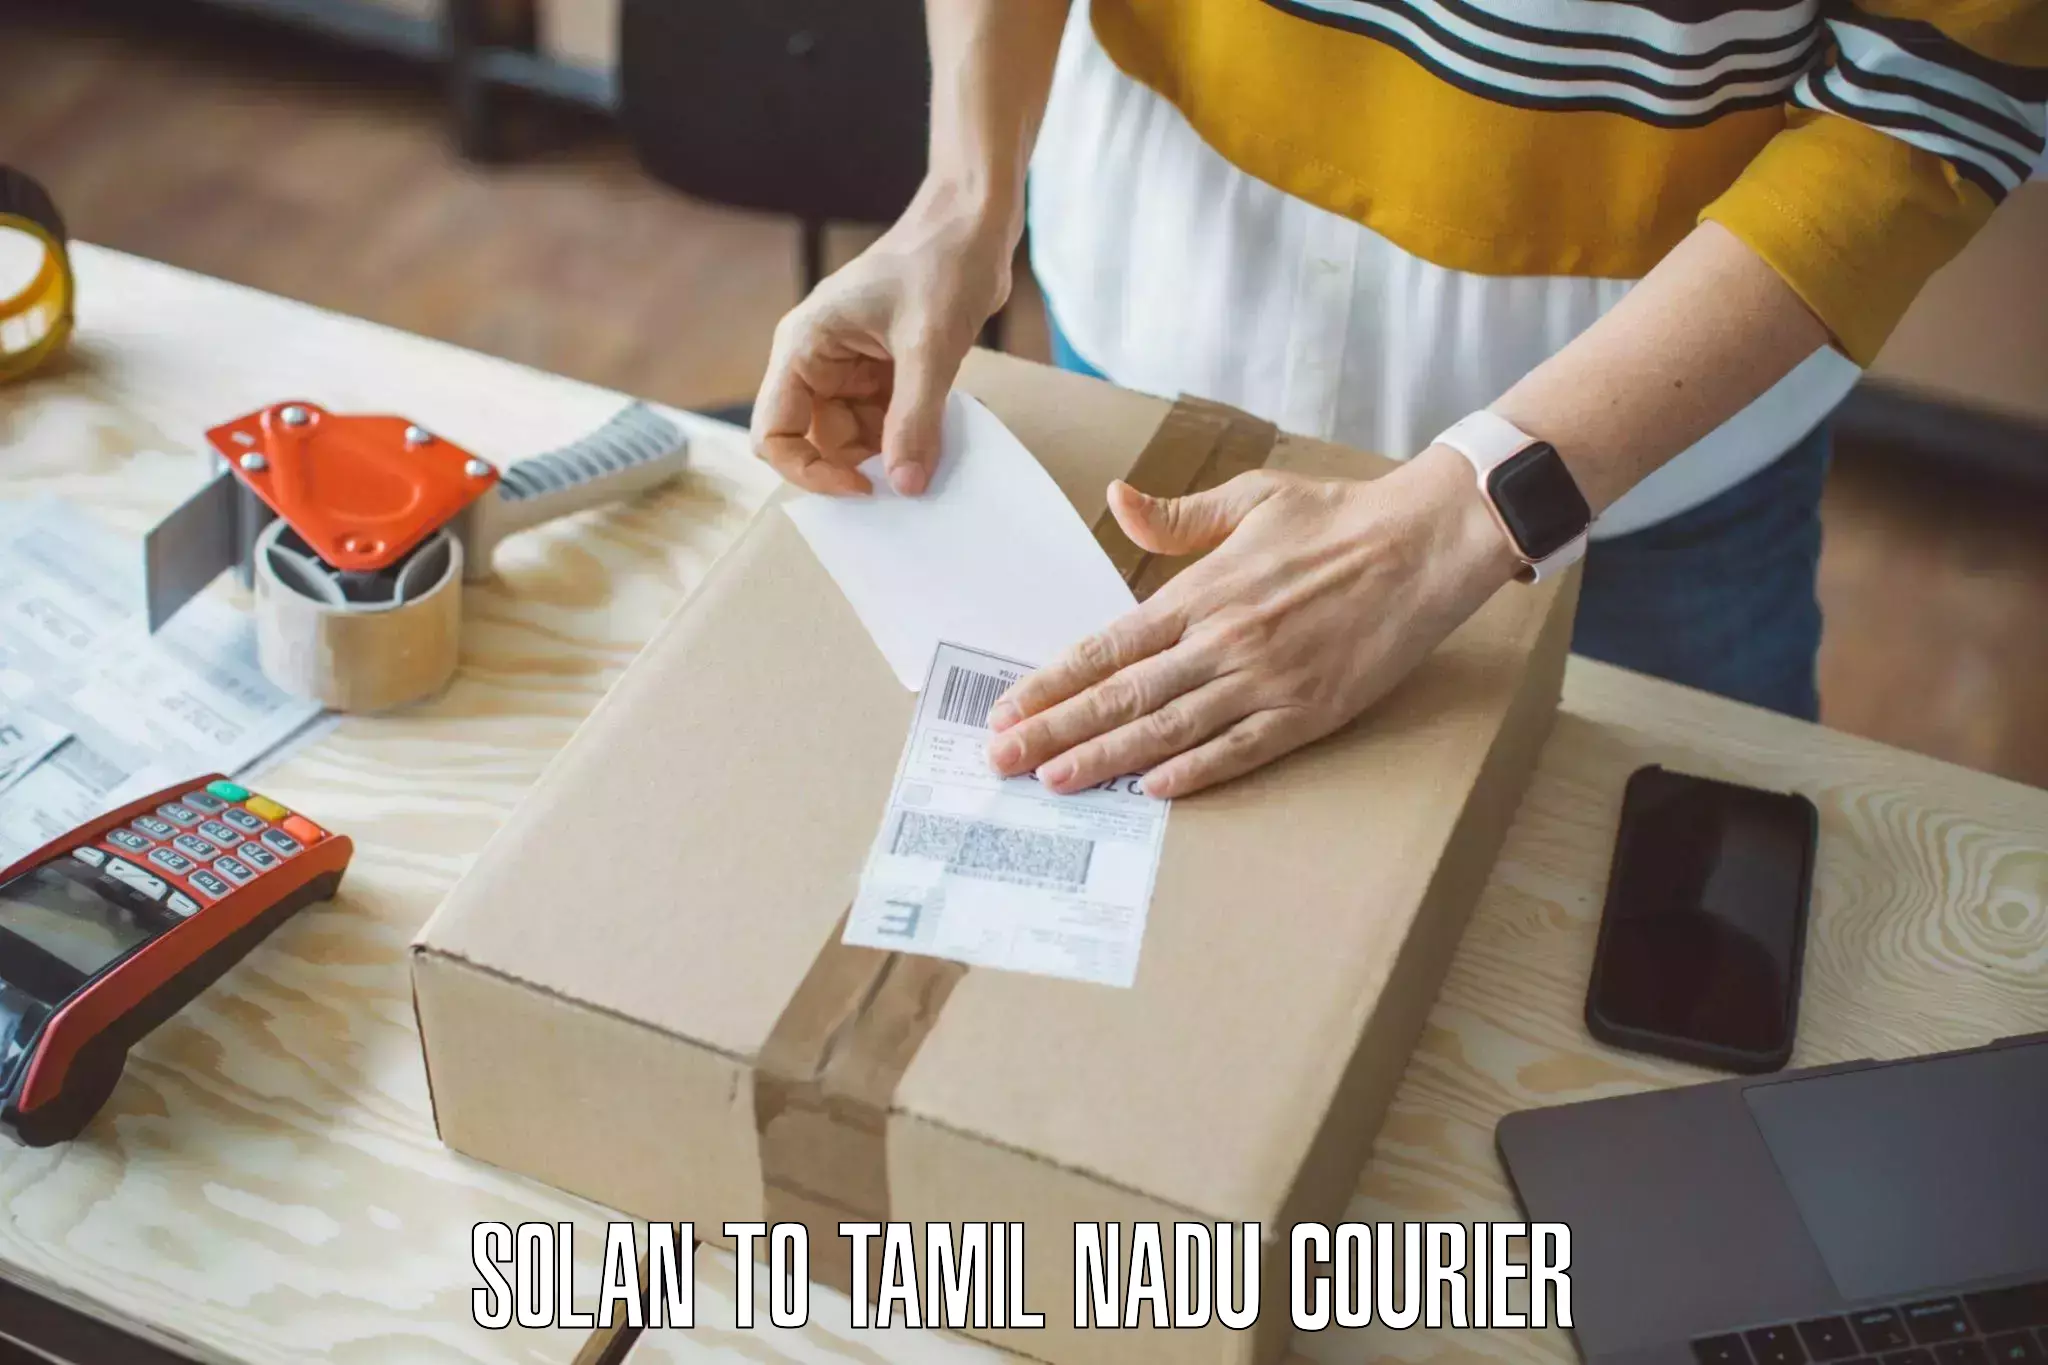 Home relocation experts Solan to Nagapattinam